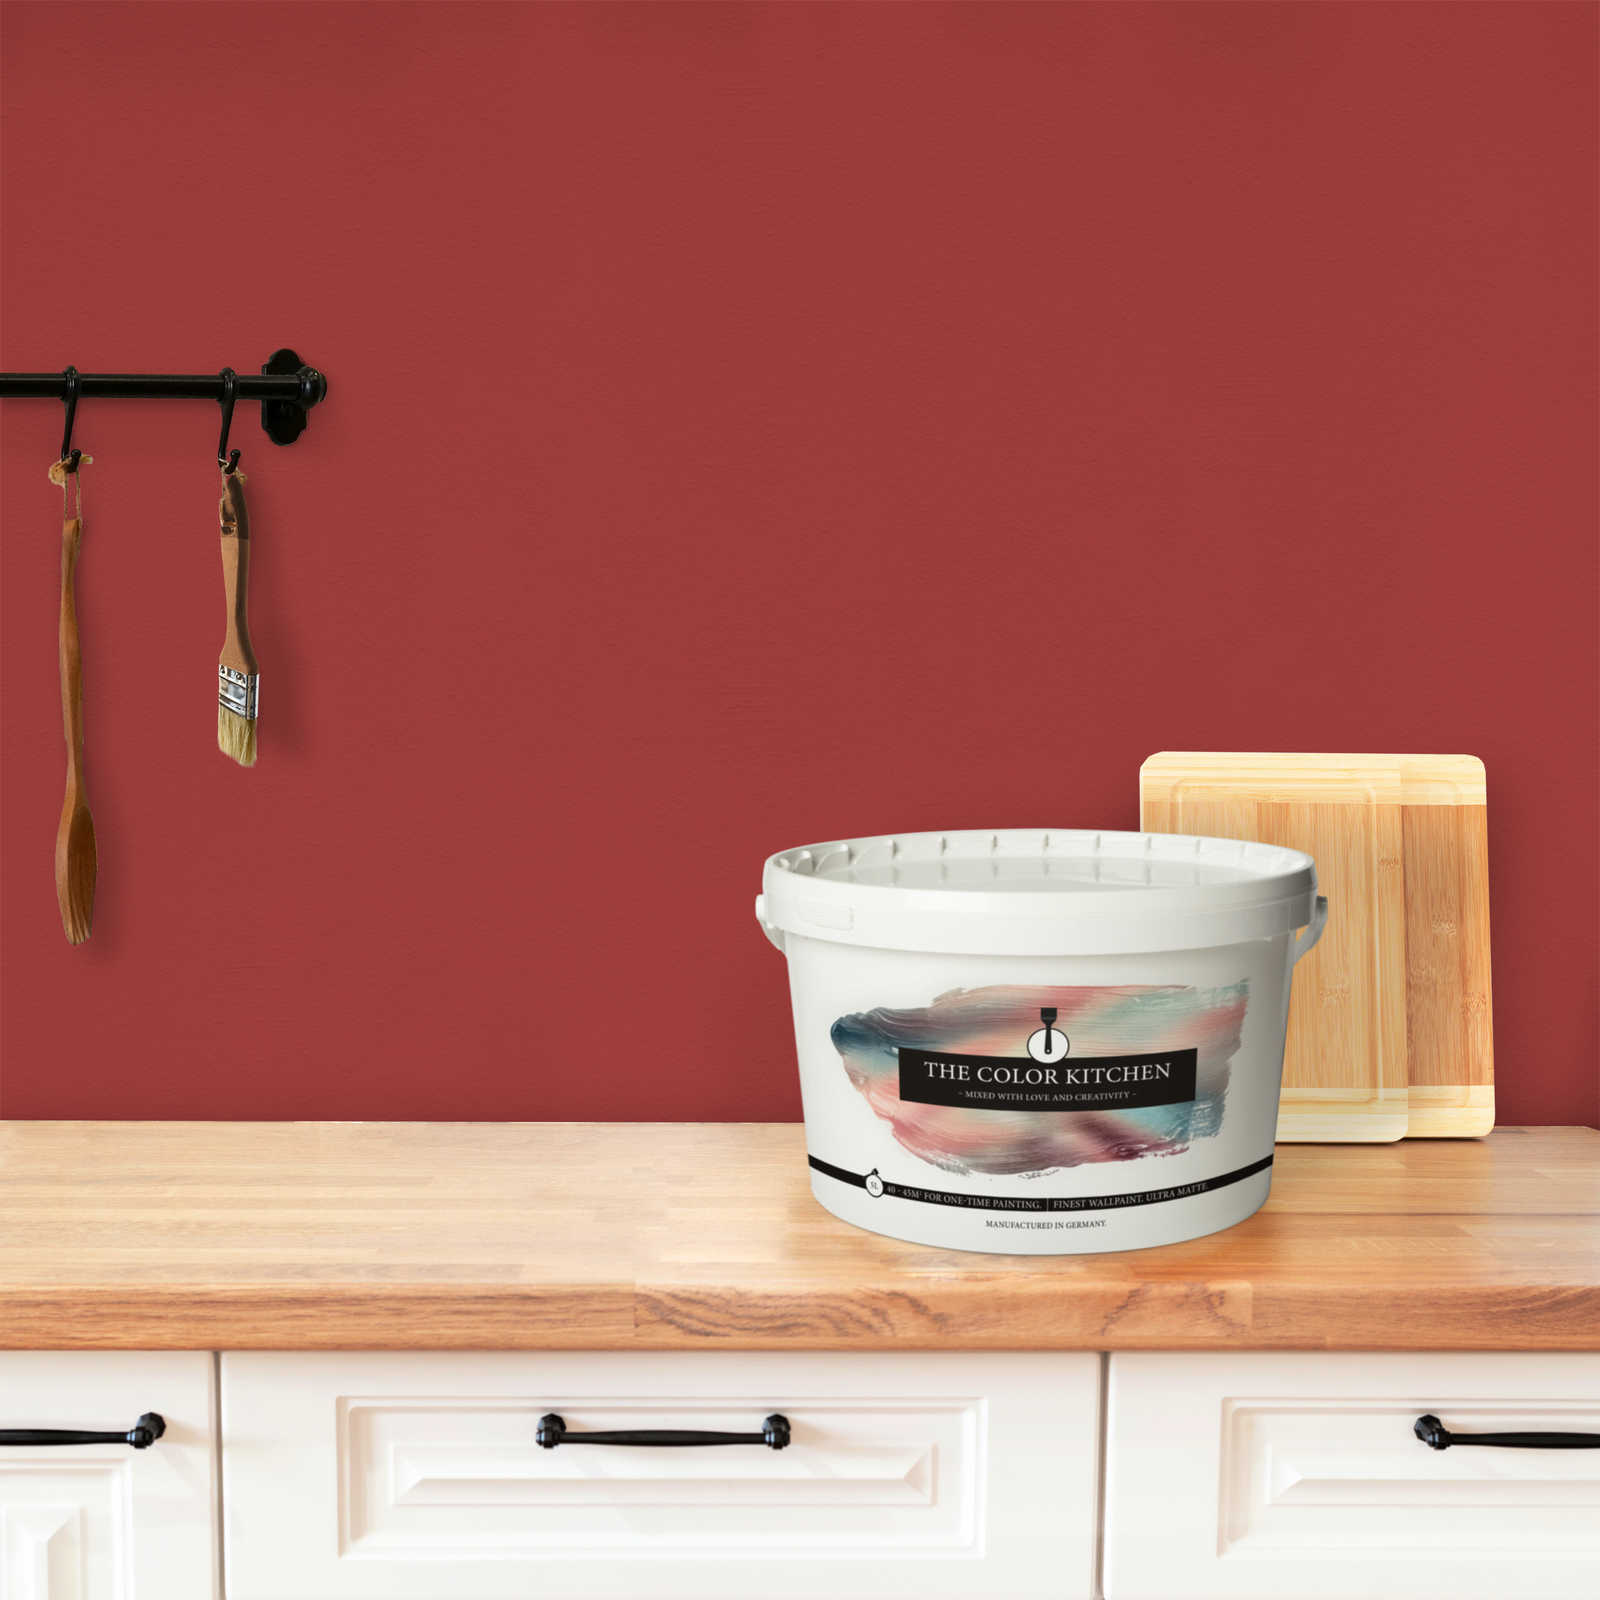             Wall Paint TCK7005 »Cheeky Chilli« in strong fire red – 5.0 litre
        